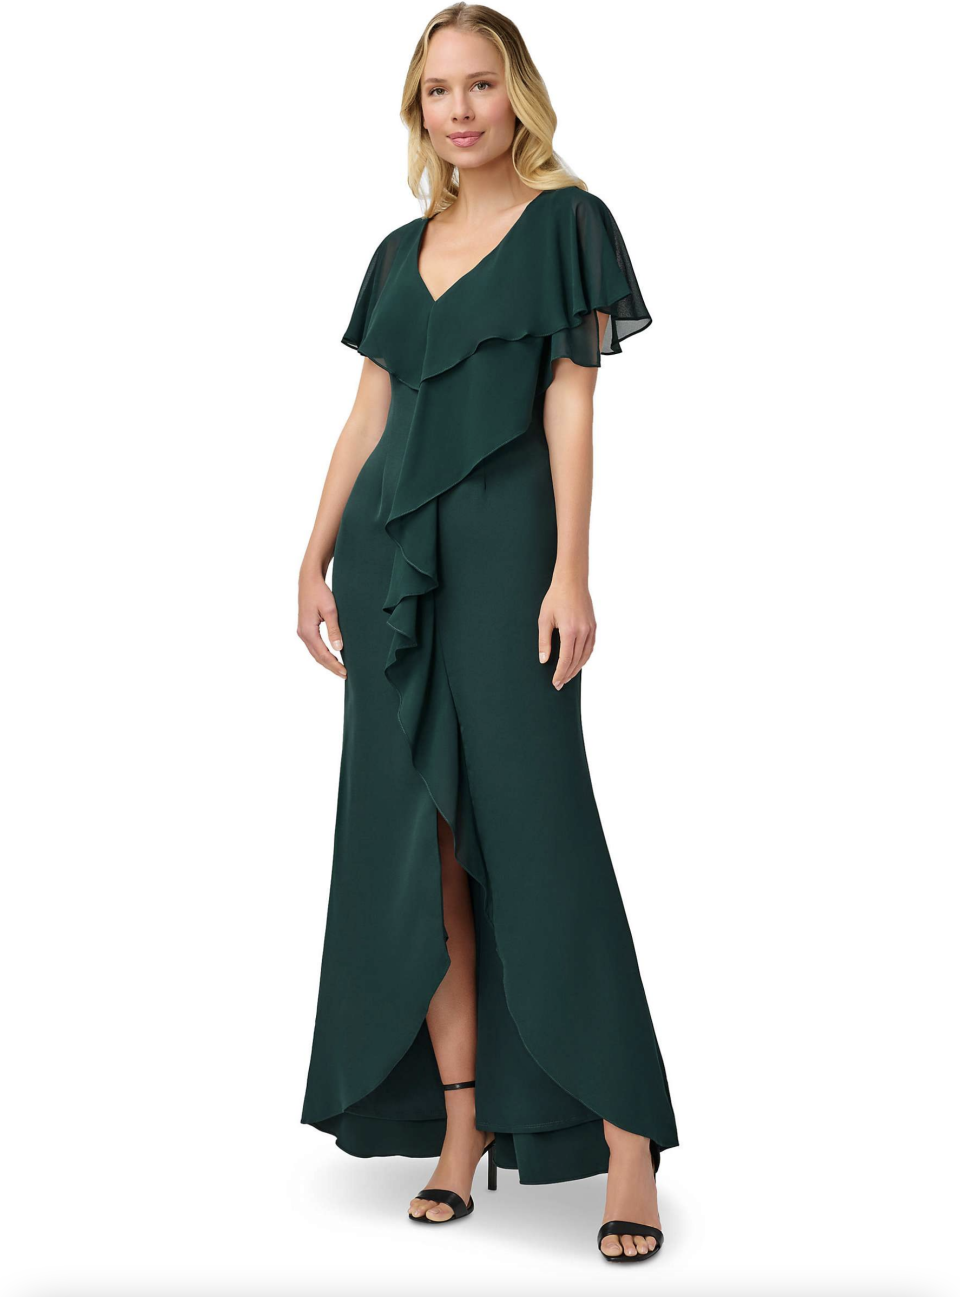 The Christmas party dress we've all been looking for by Adrianna Papell.  (John Lewis)